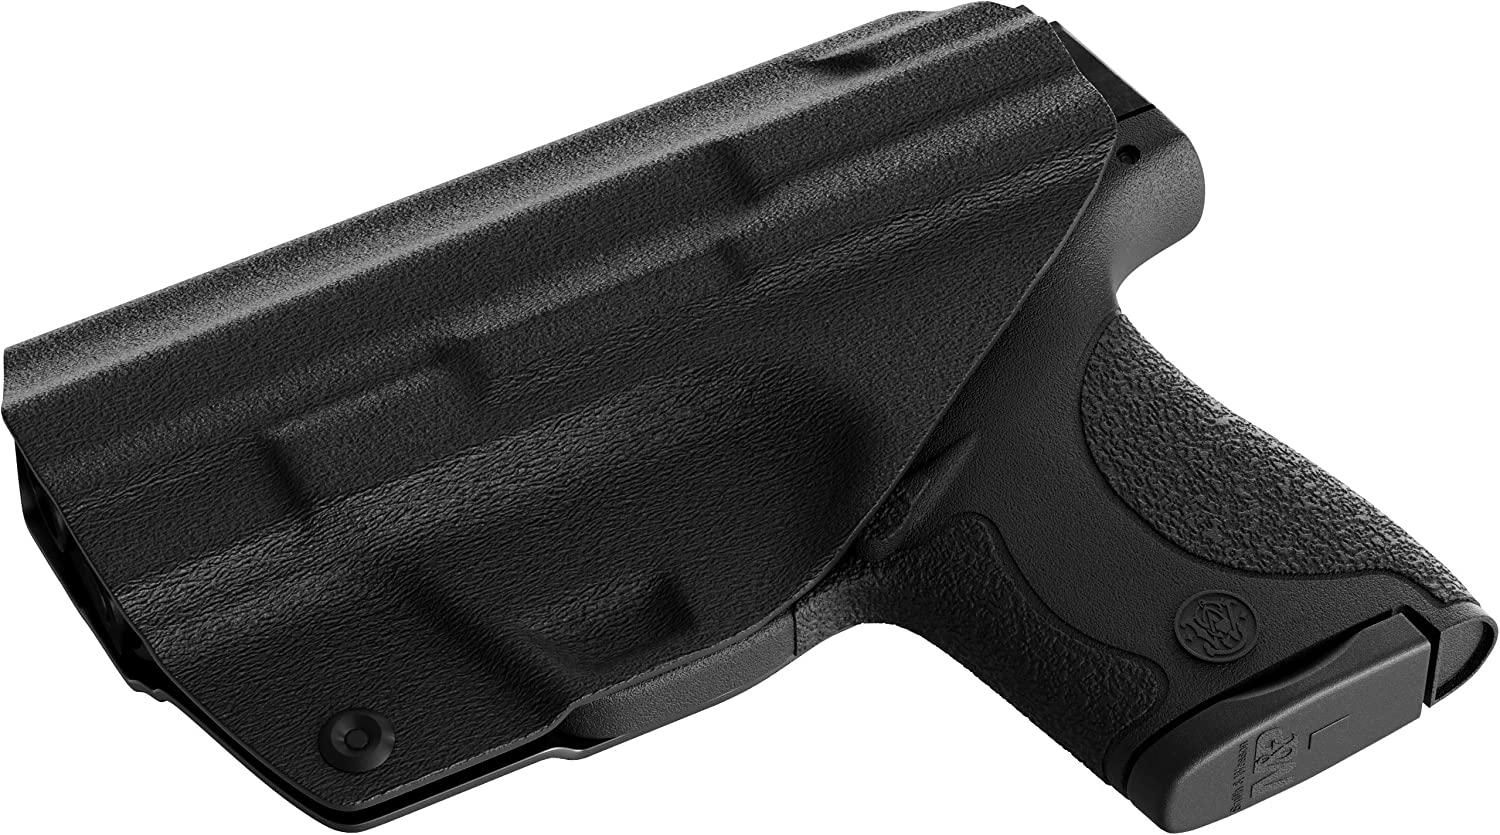 We The People Holsters - Black Right Hand Inside Waistband Concealed Carry  Kydex IWB Holster Compatible with 1911 4 Commander No Rail Only Gun, Gun  Holsters -  Canada